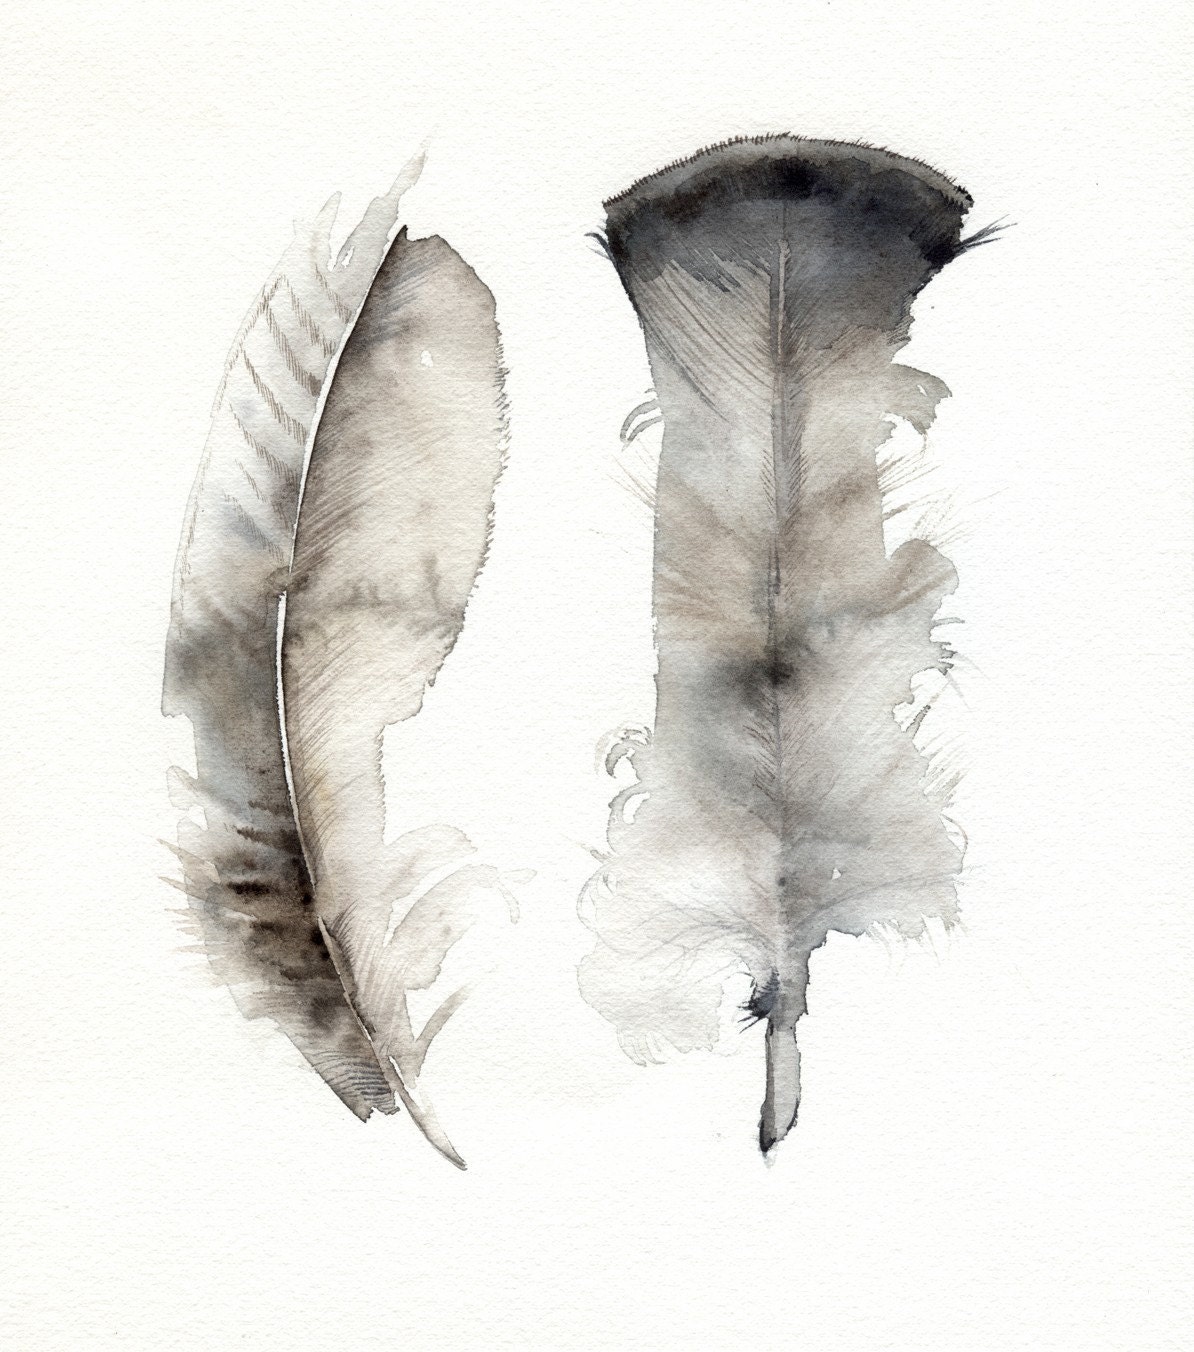 Turkey Feathers Original Watercolor Painting